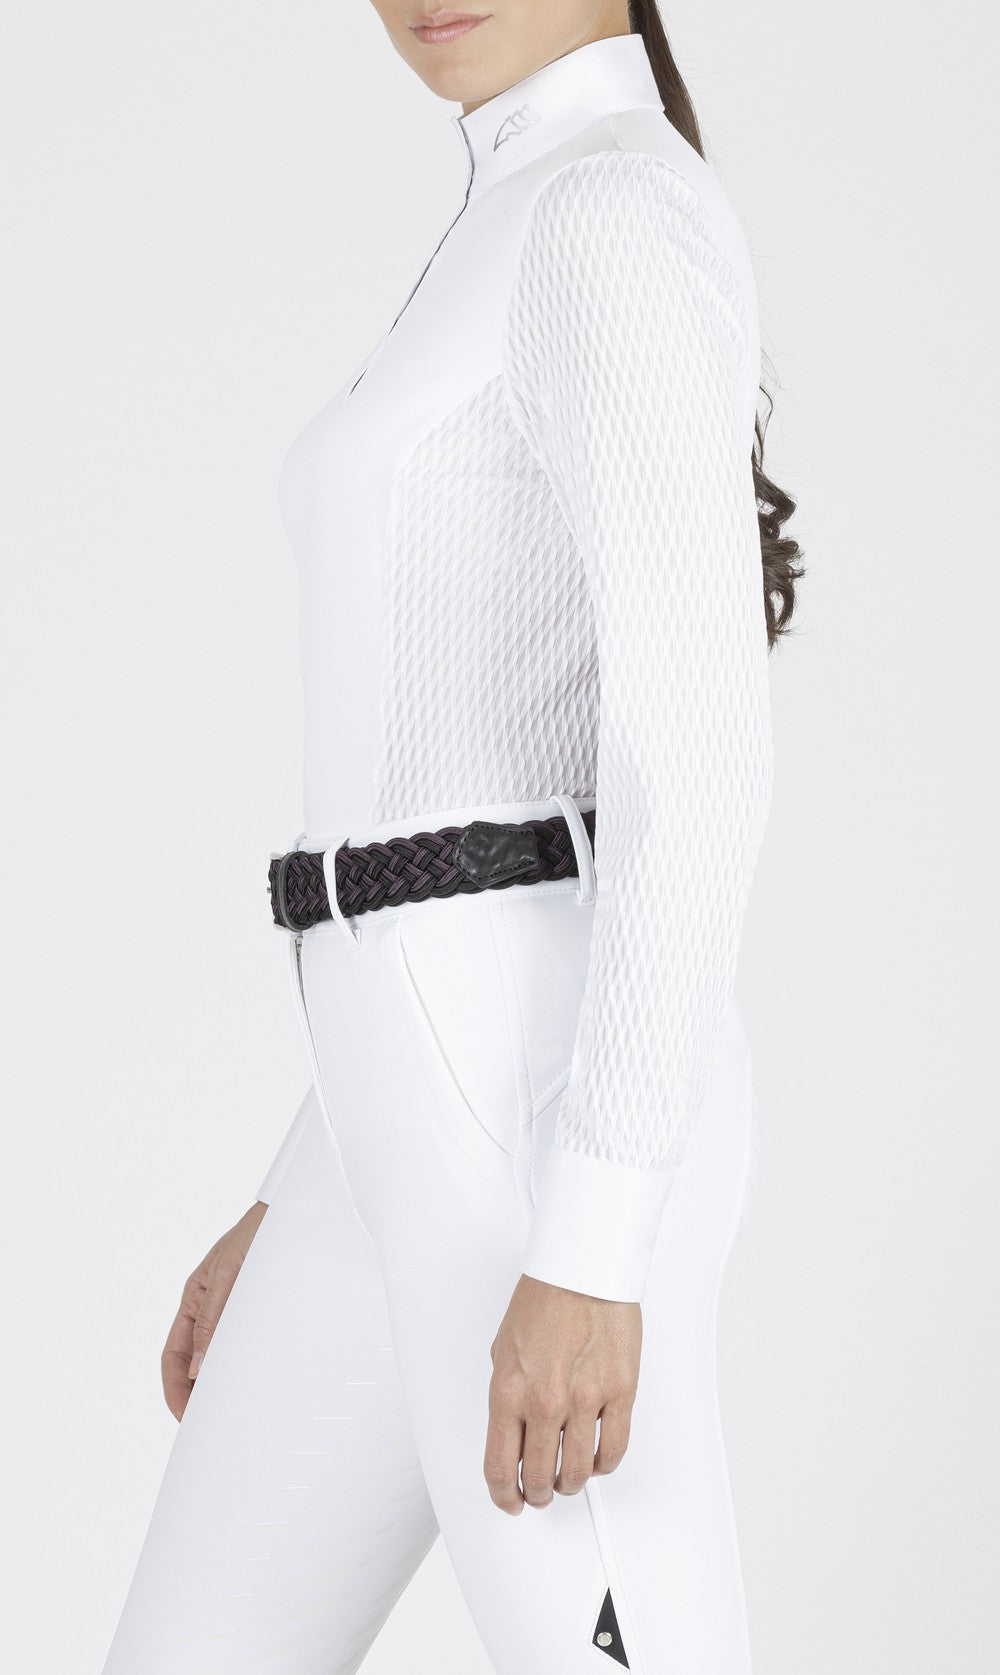 Equiline competition shirt long sleeves ladies Catic White